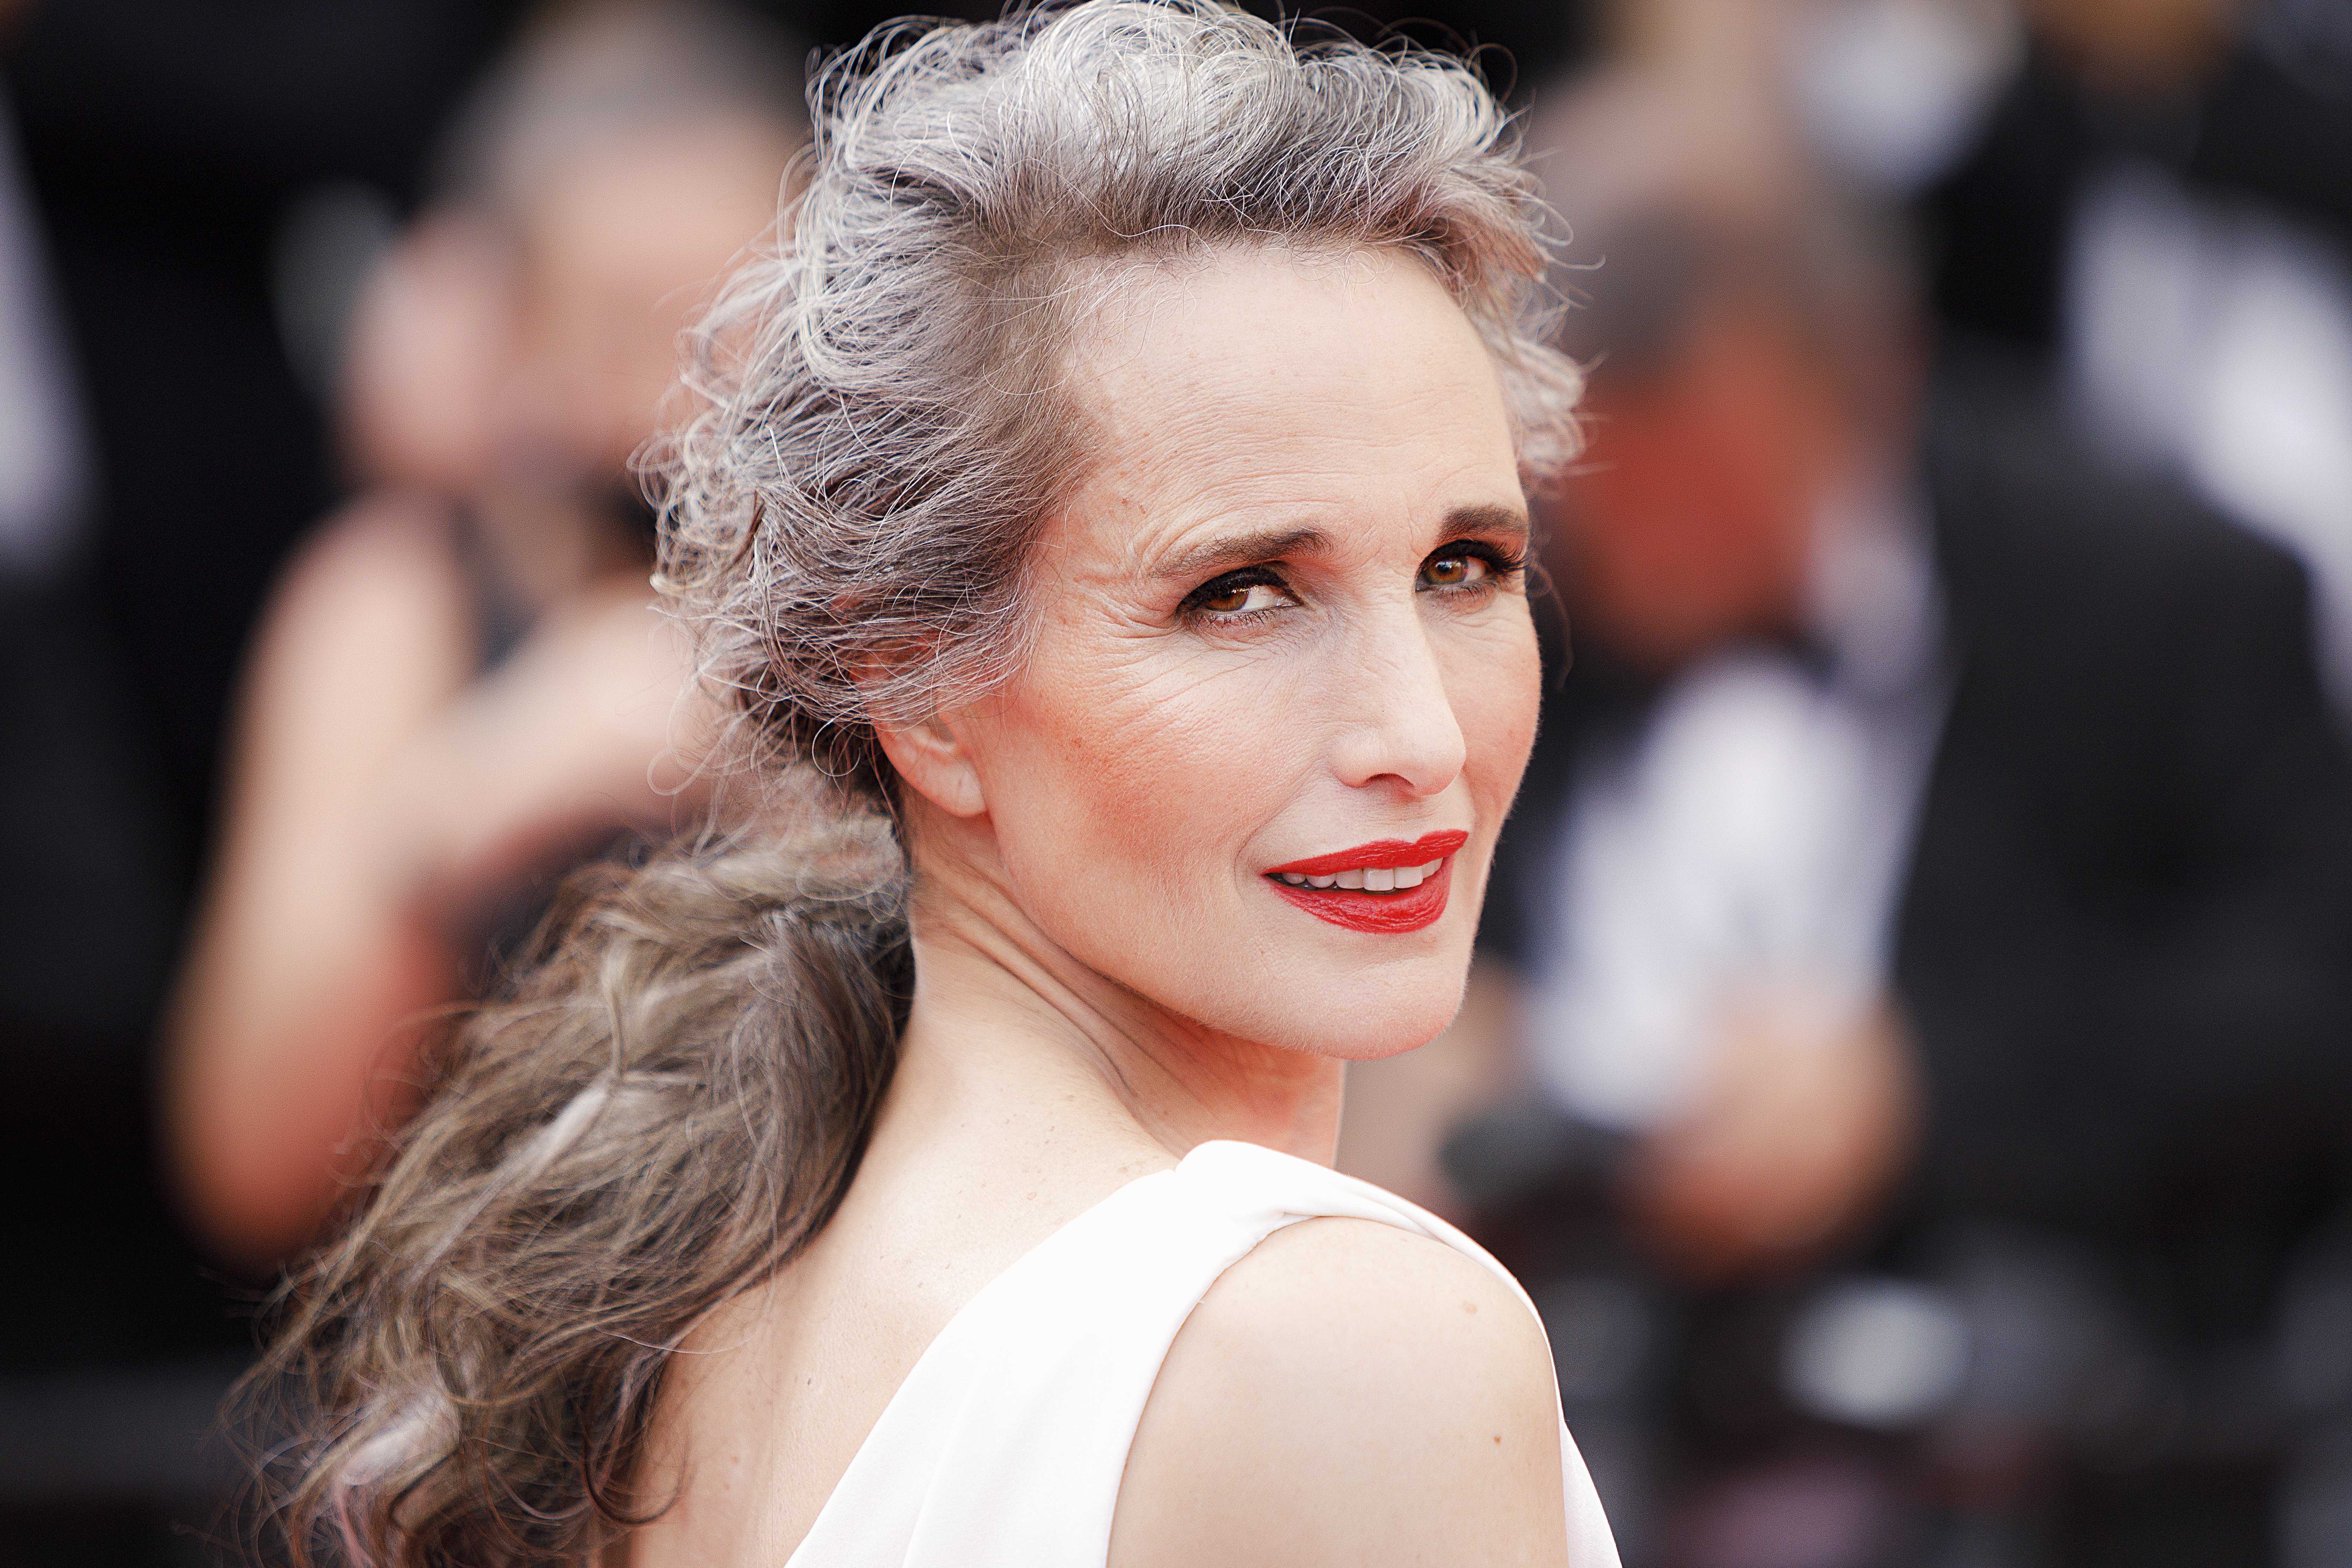 Andie MacDowell in Cannes, Frankreich am 7. Juli 2021 | Quelle: Getty Images